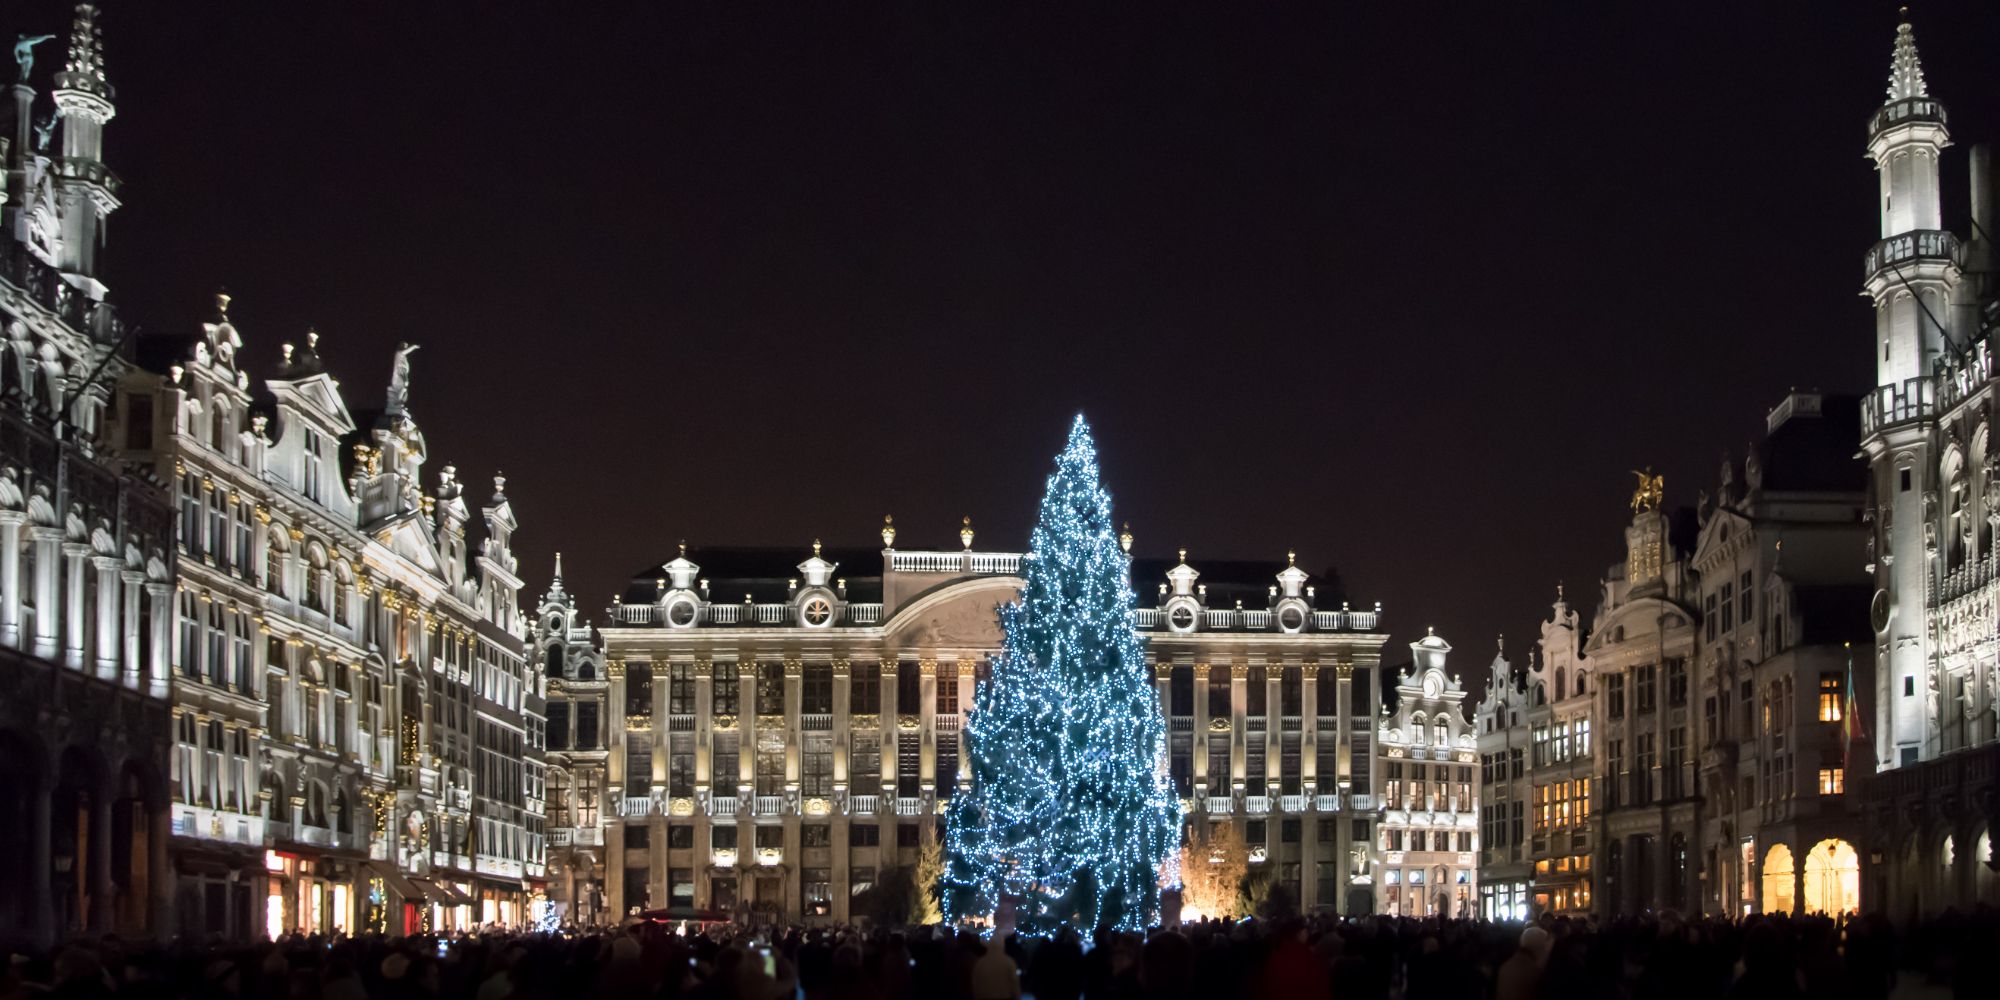 Brussells square with Christmas tree at night